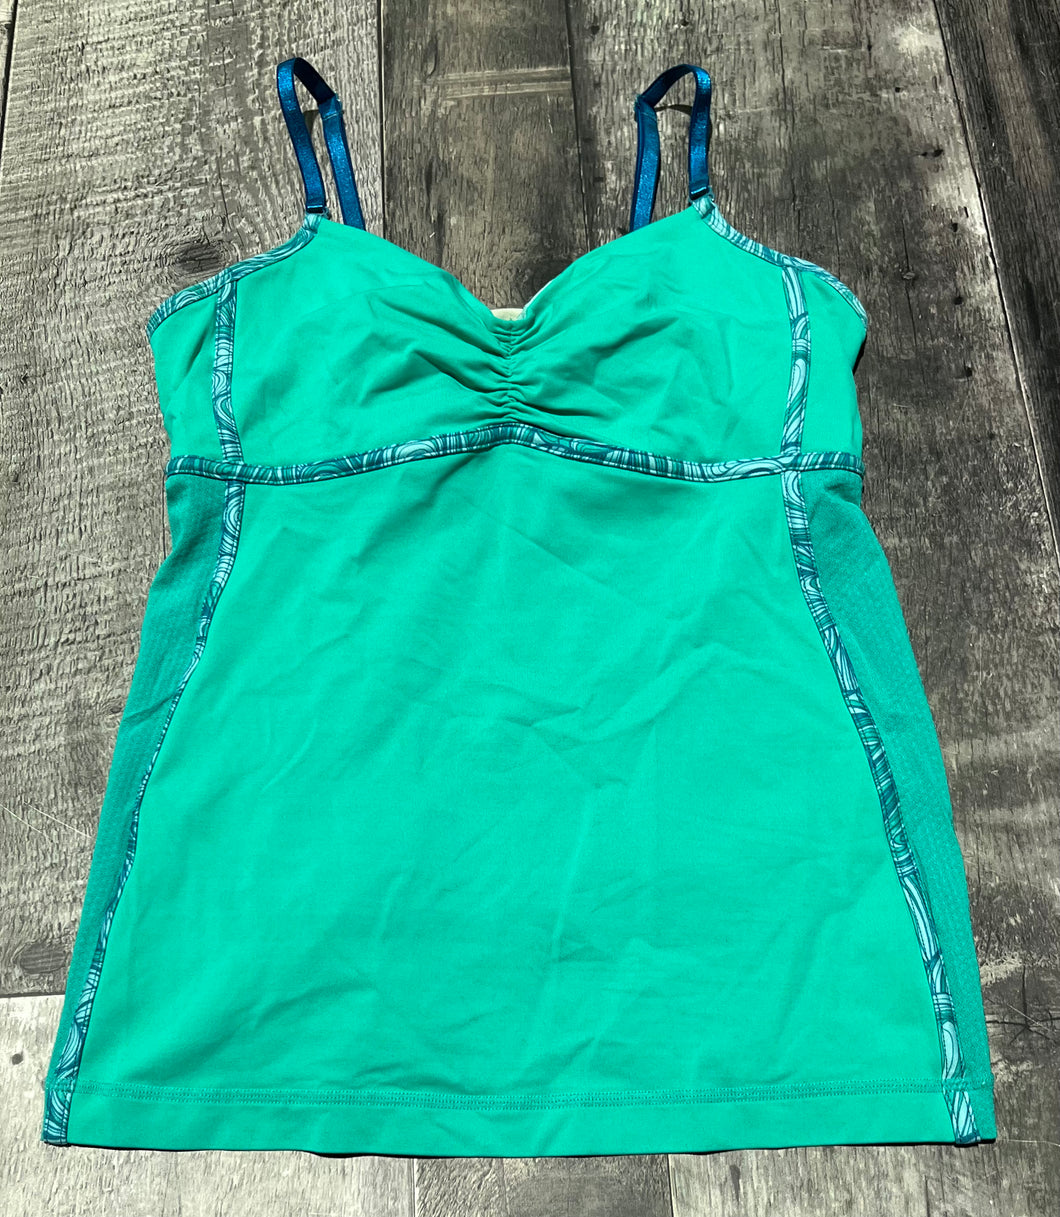 lululemon blue tank top - Hers size approx S